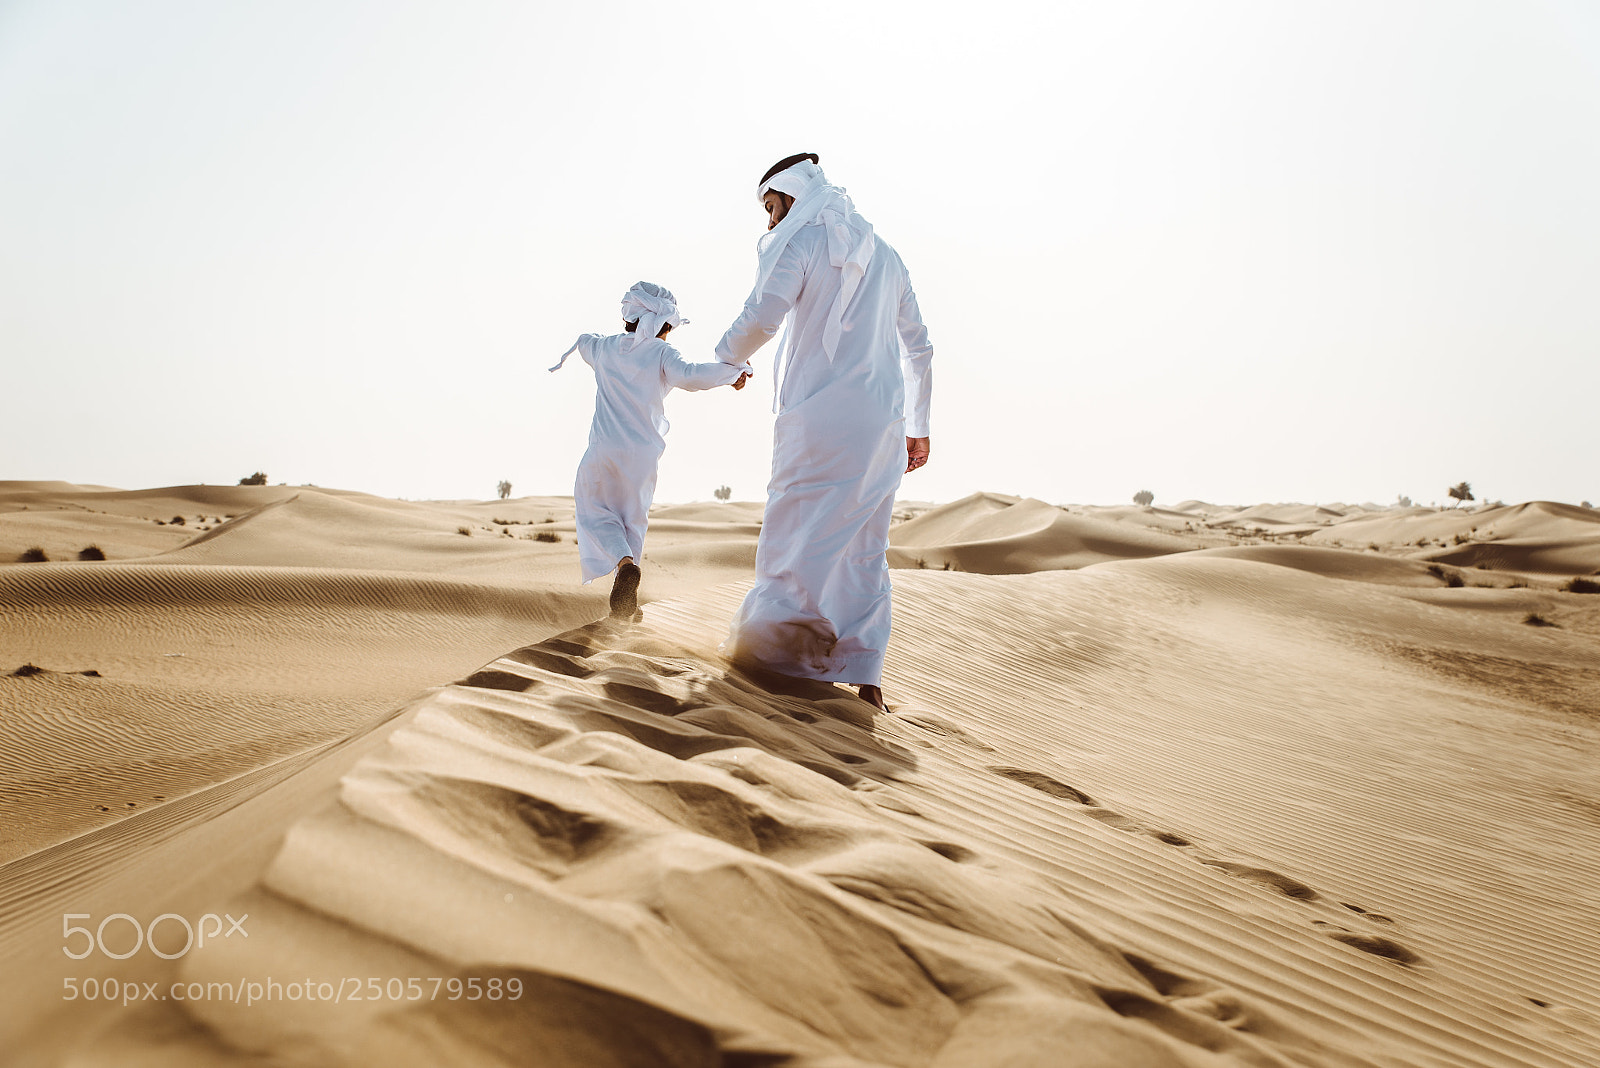 Nikon D610 sample photo. Father and son spending photography